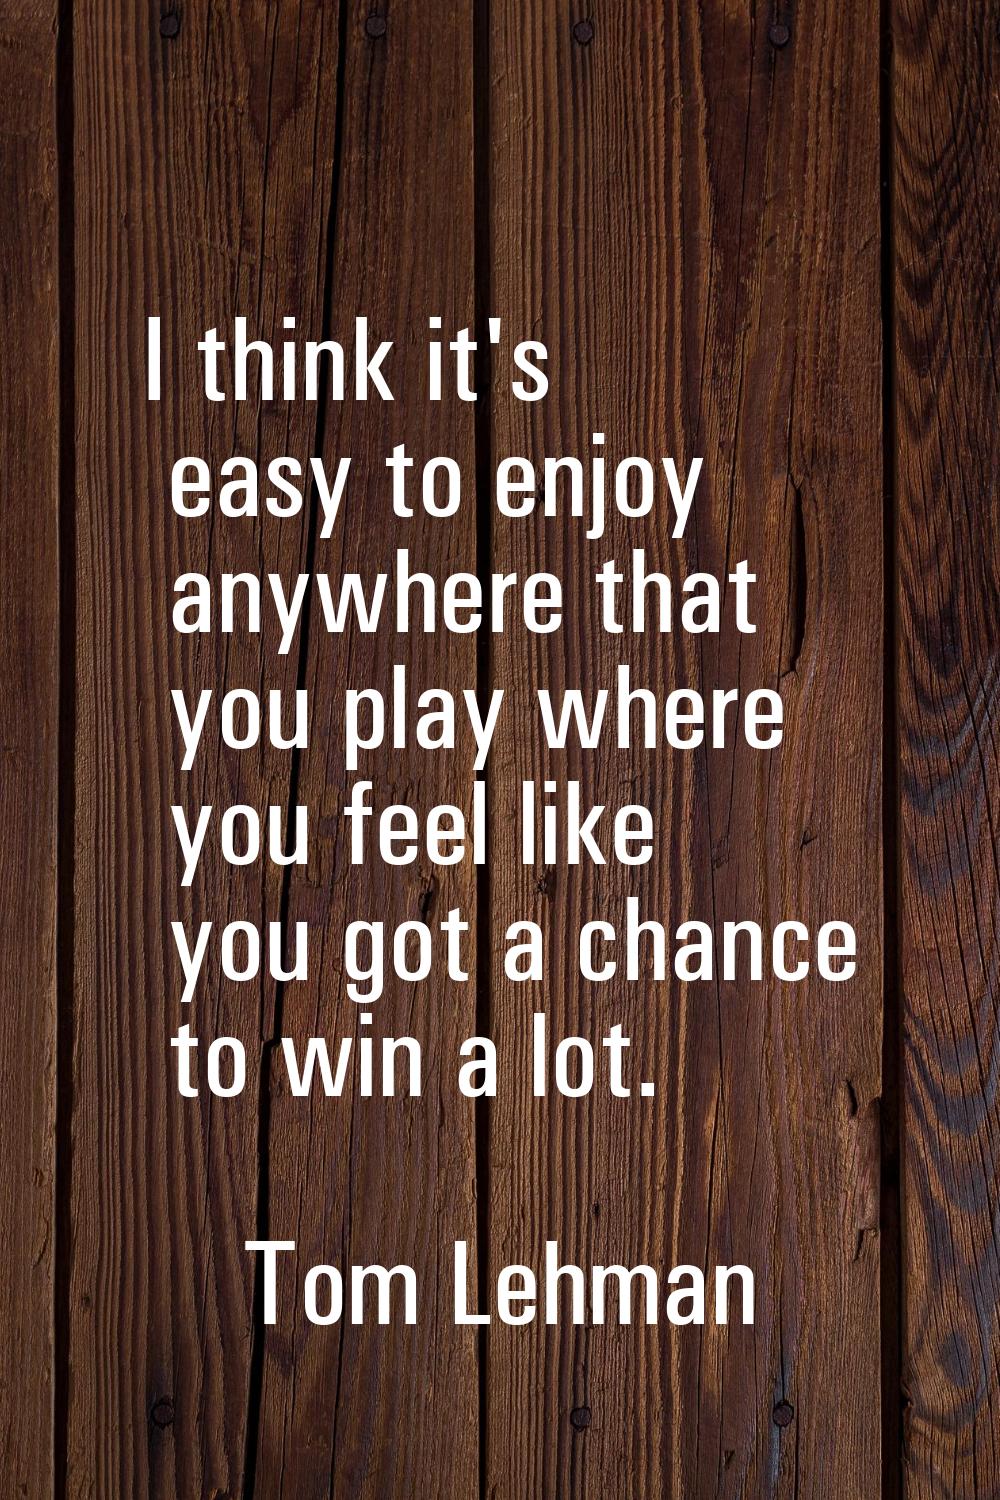 I think it's easy to enjoy anywhere that you play where you feel like you got a chance to win a lot